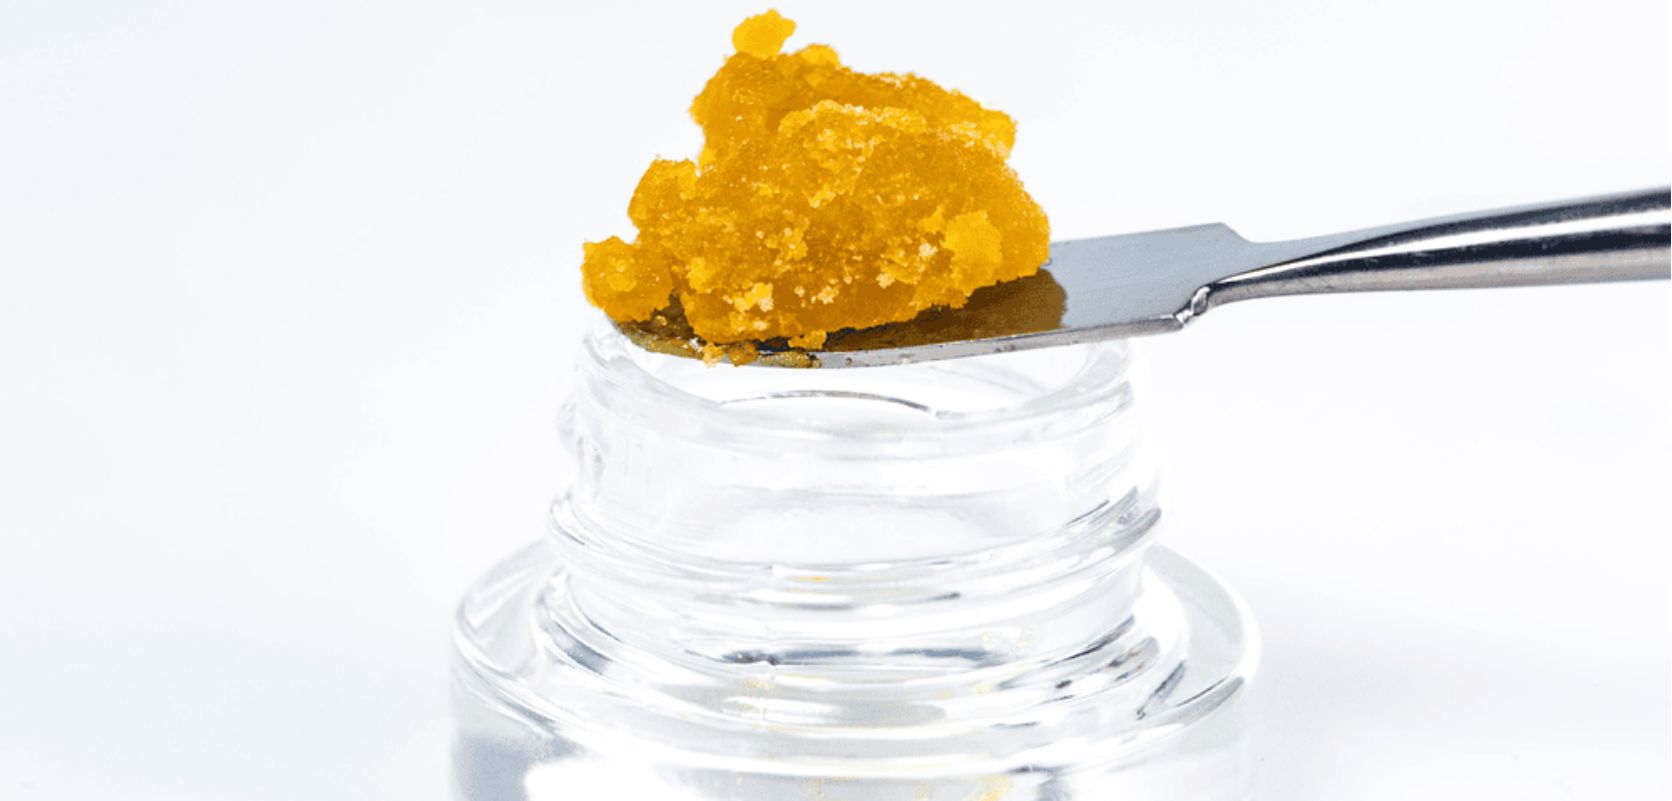 This freezing trick saves the original taste and strength that might fade away in the usual drying process. So, "live" in live resin is like a special signal for a more exciting and fresh cannabis experience!